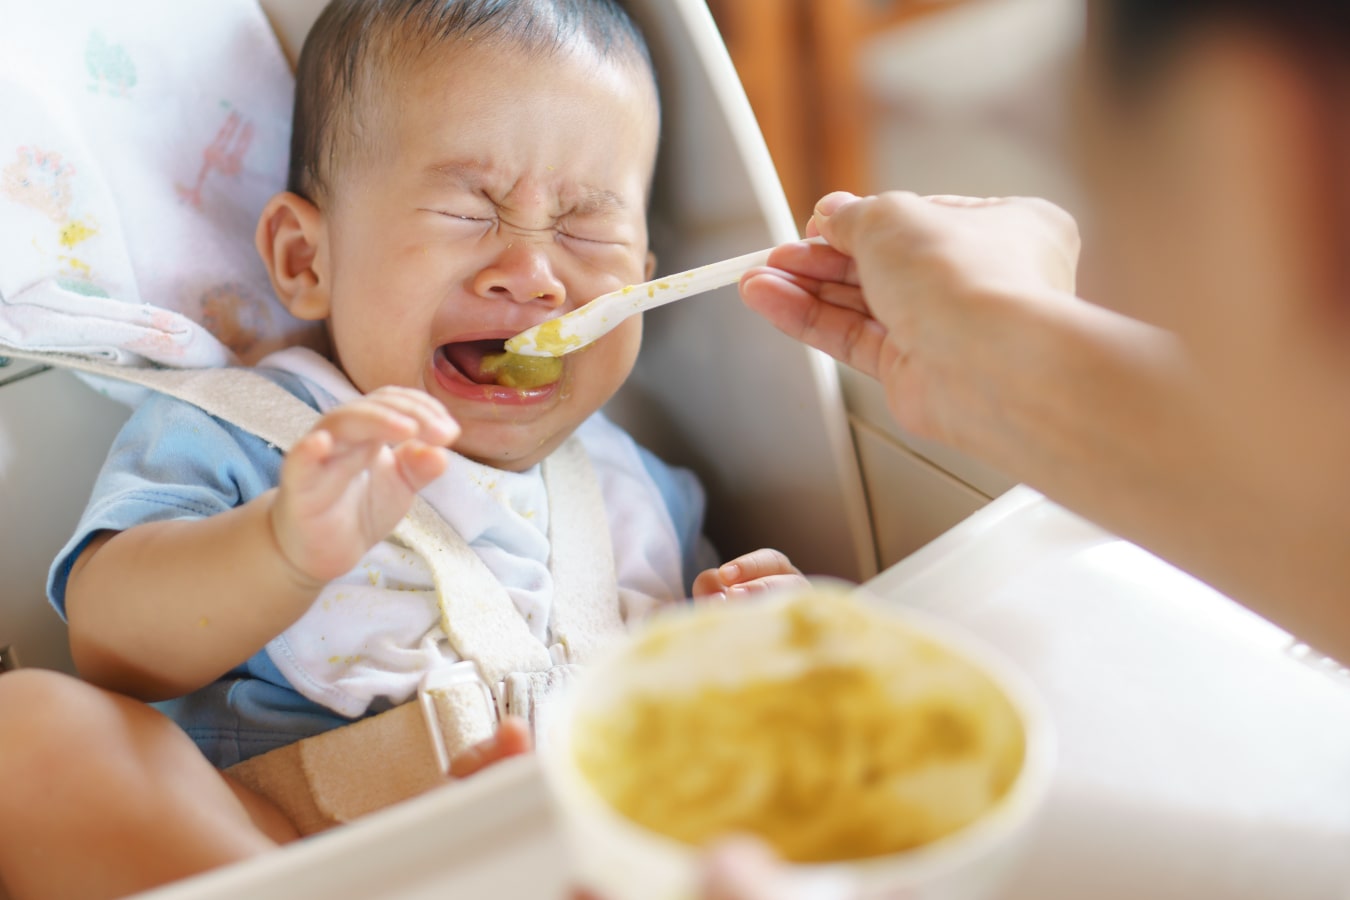 The child sits fastened in a feeding chair, refuses to eat from the spoon, and cries.